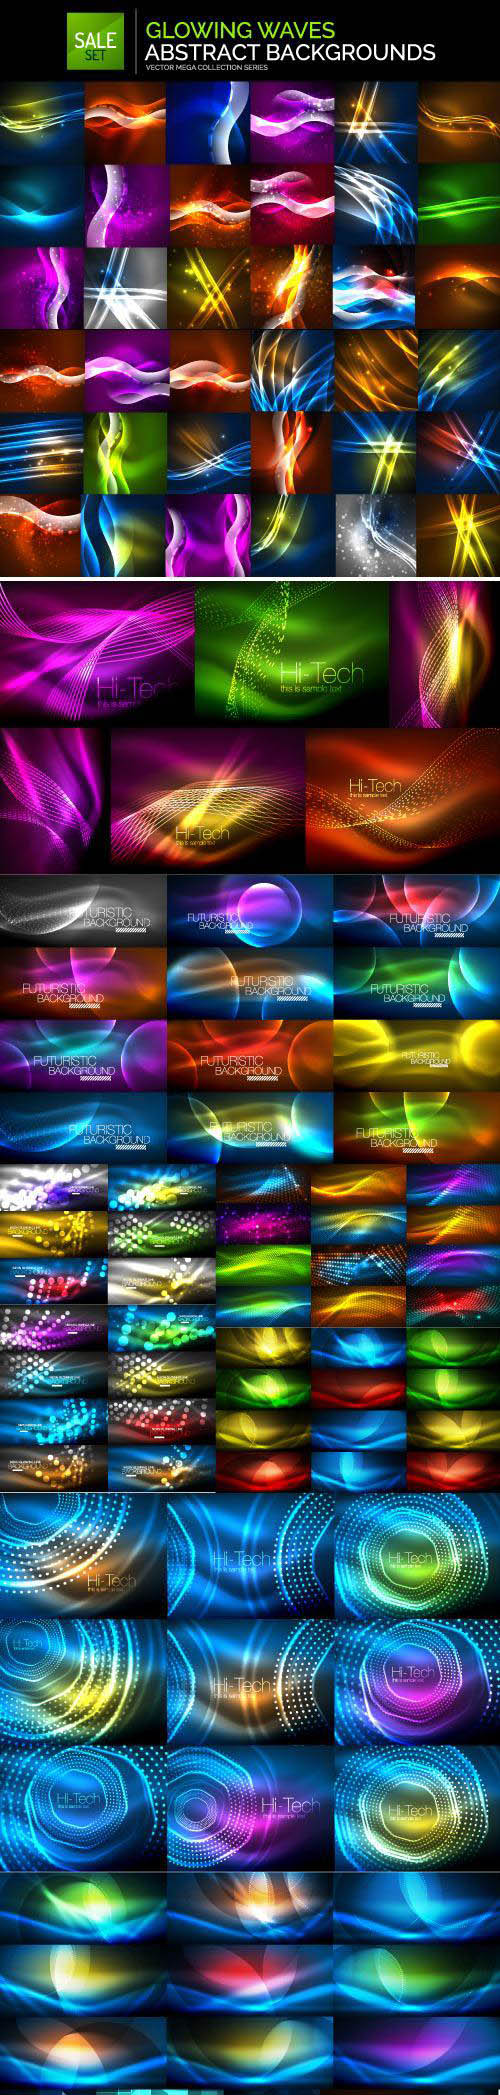 Mega collection of neon glowing waves # 2